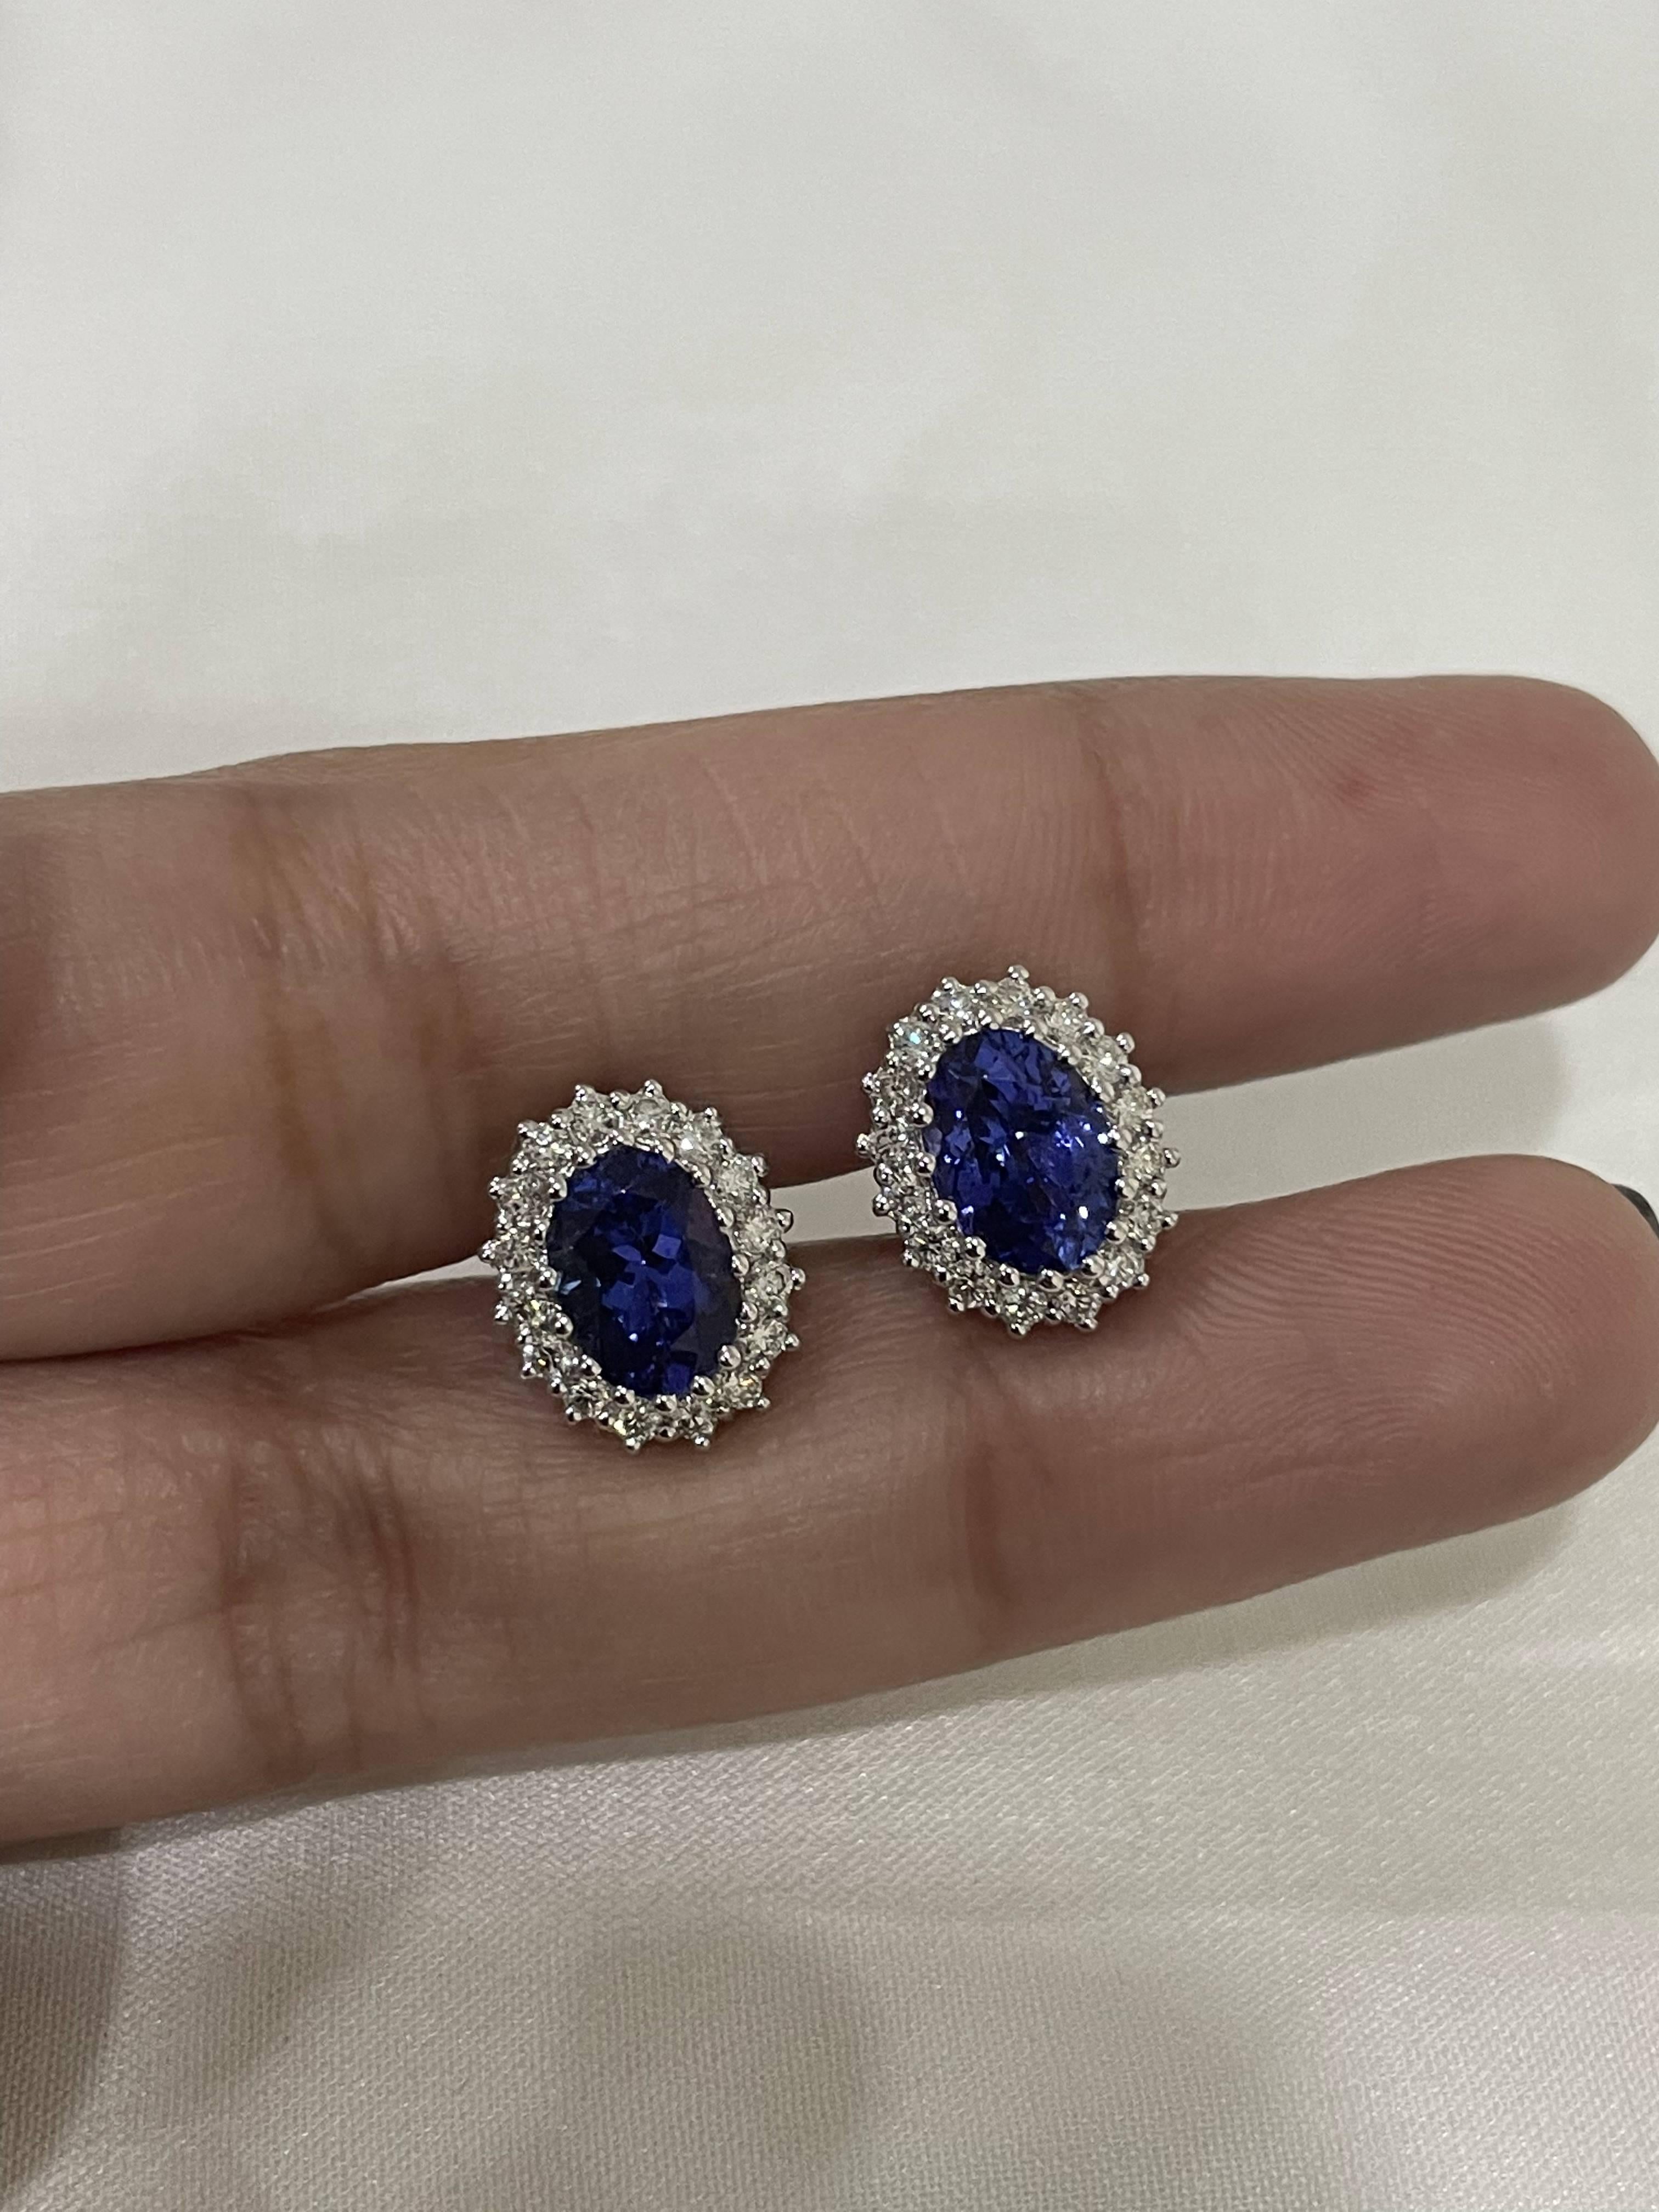 Studs create a subtle beauty while showcasing the colors of the natural precious gemstones and illuminating diamonds making a statement.

Oval cut tanzanite studs with diamonds in 18K white gold. Embrace your look with these stunning pair of